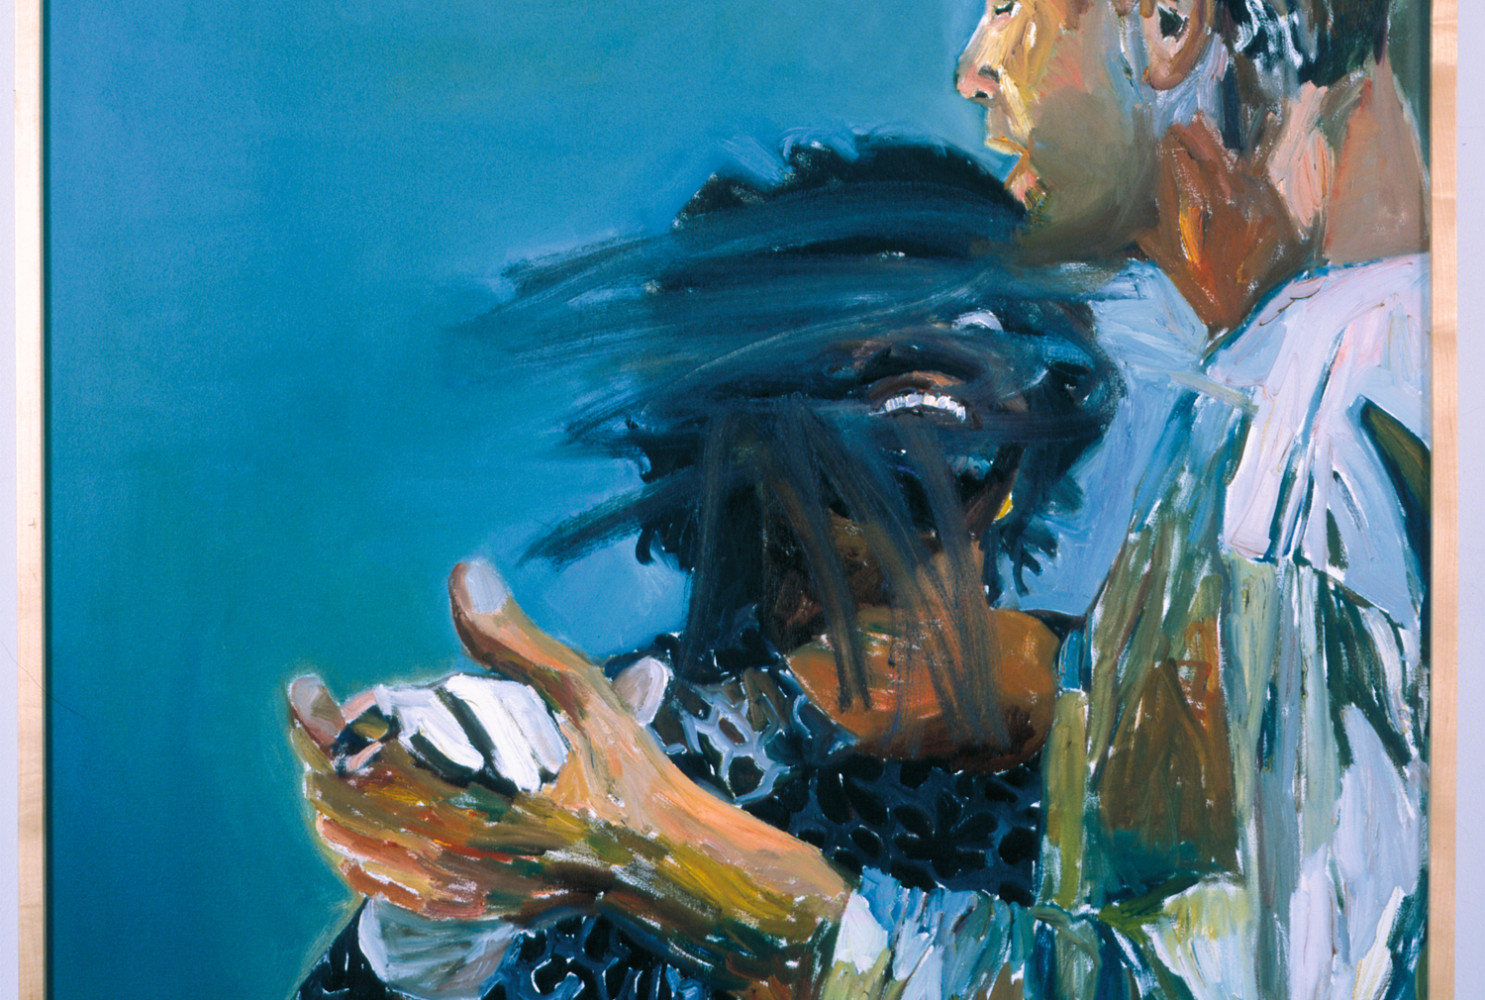 Invisible Me, 1999, by Beverly McIver (American, b. 1962). Oil on canvas,  
35 1/2 x 35 1/2 inches. Courtesy of Douglas Walla, New York.
